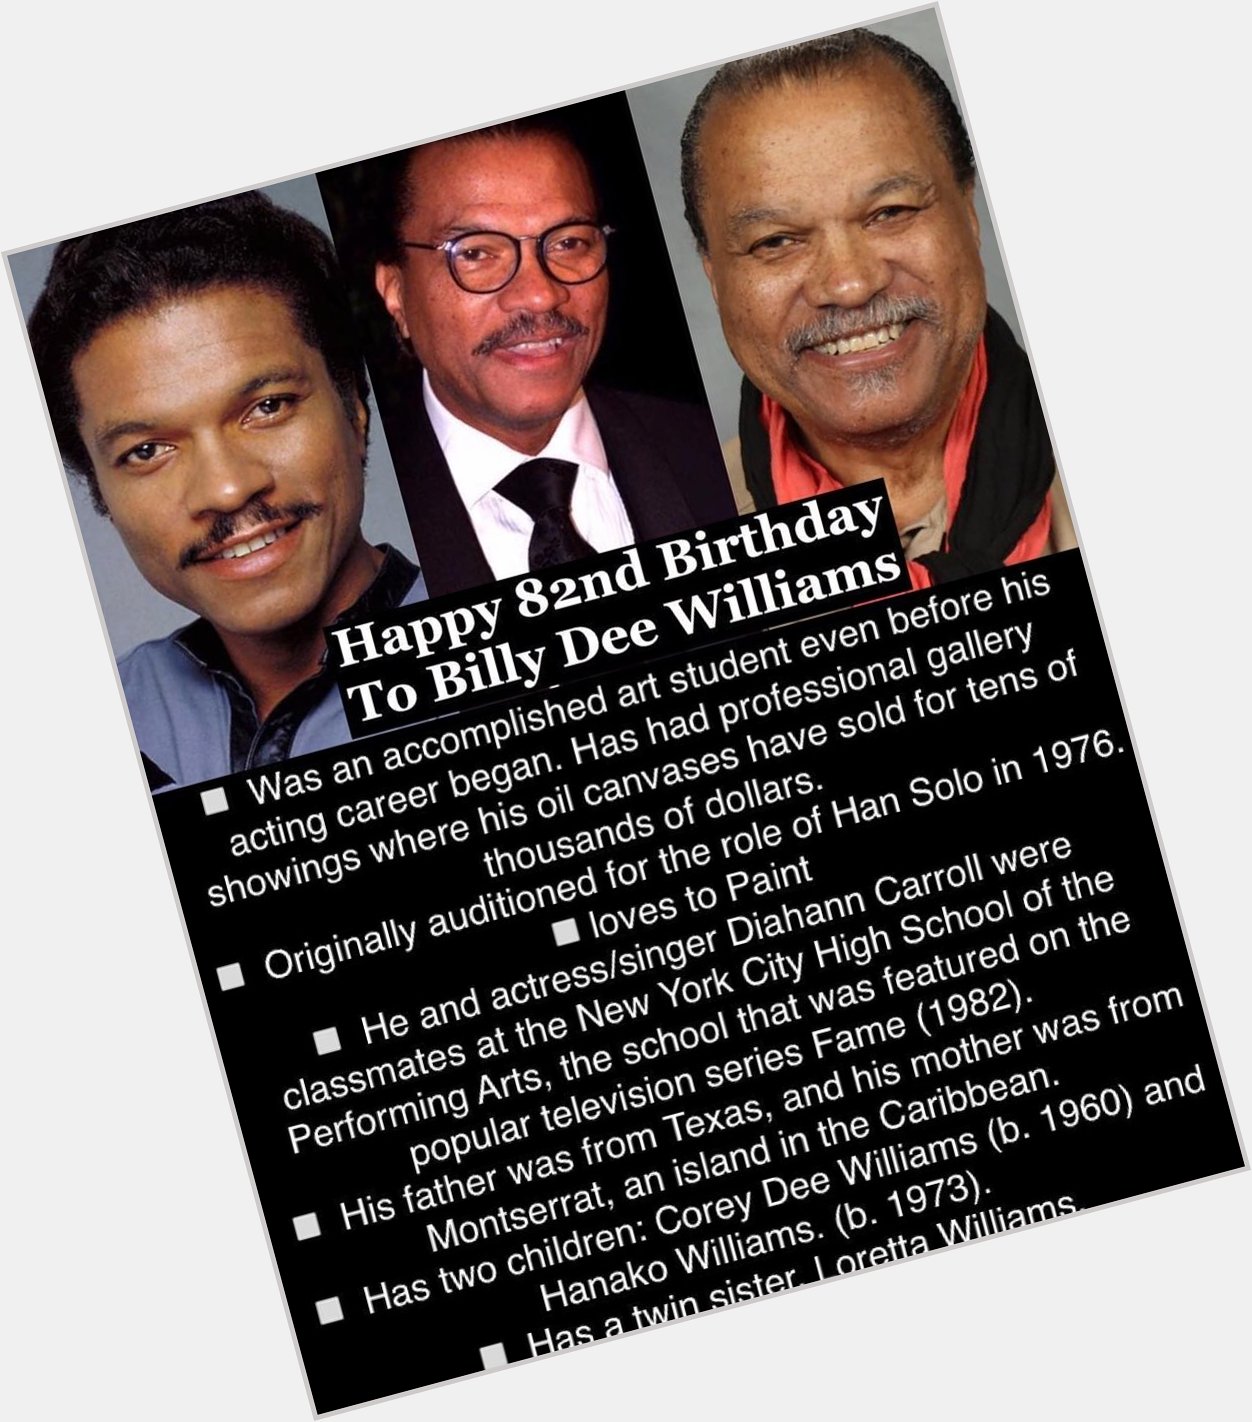 April 6: Happy 82nd Birthday to Billy Dee Williams 